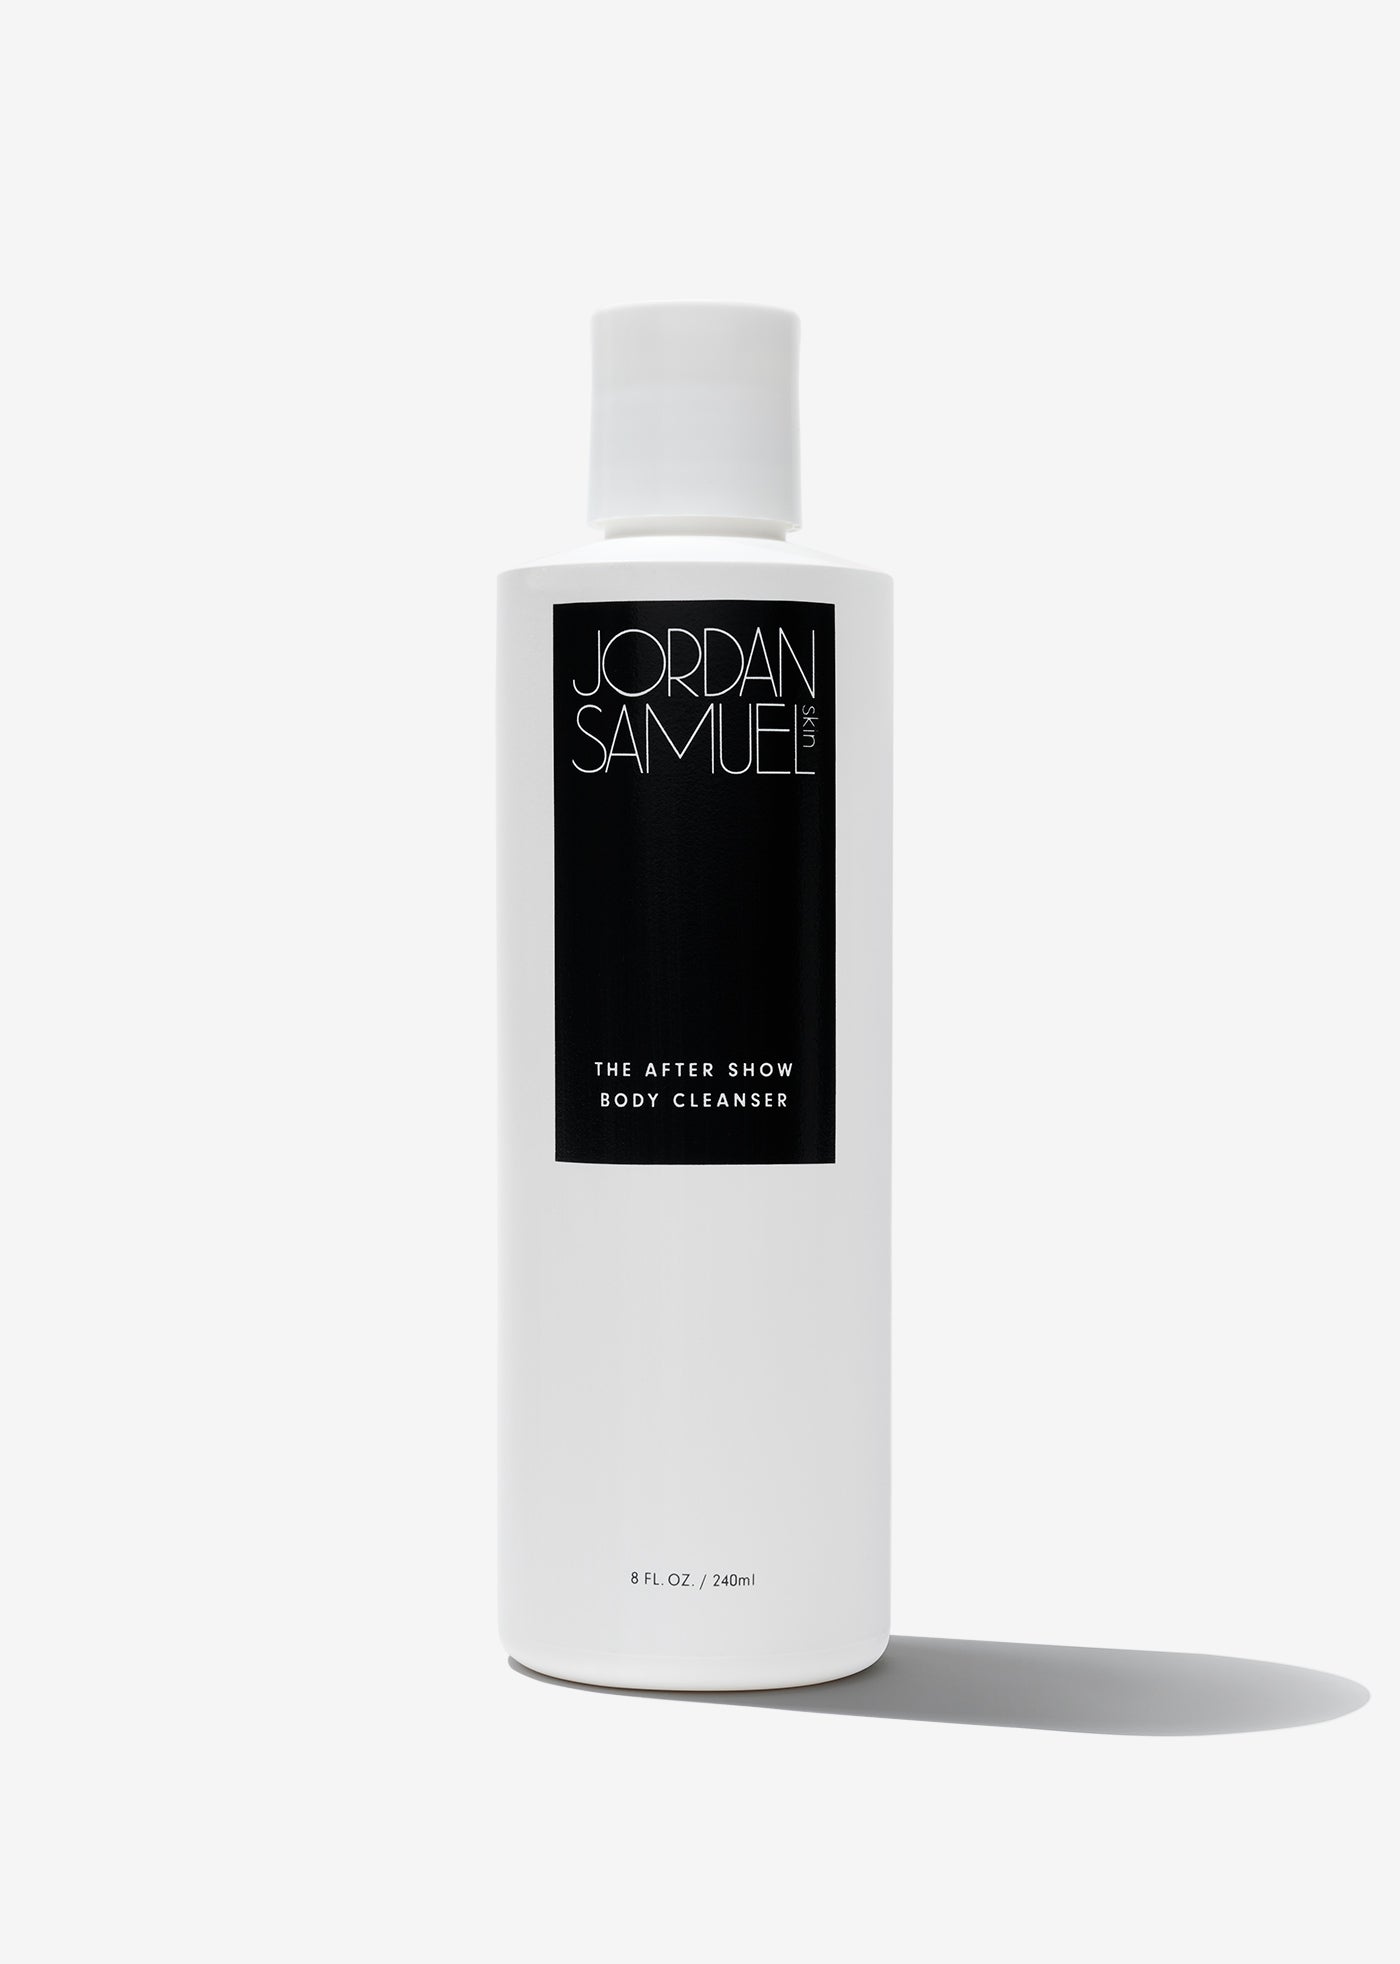 The After Show Body Cleanser in white plastic bottle, eight-fluid-ounces/240 milliliters.